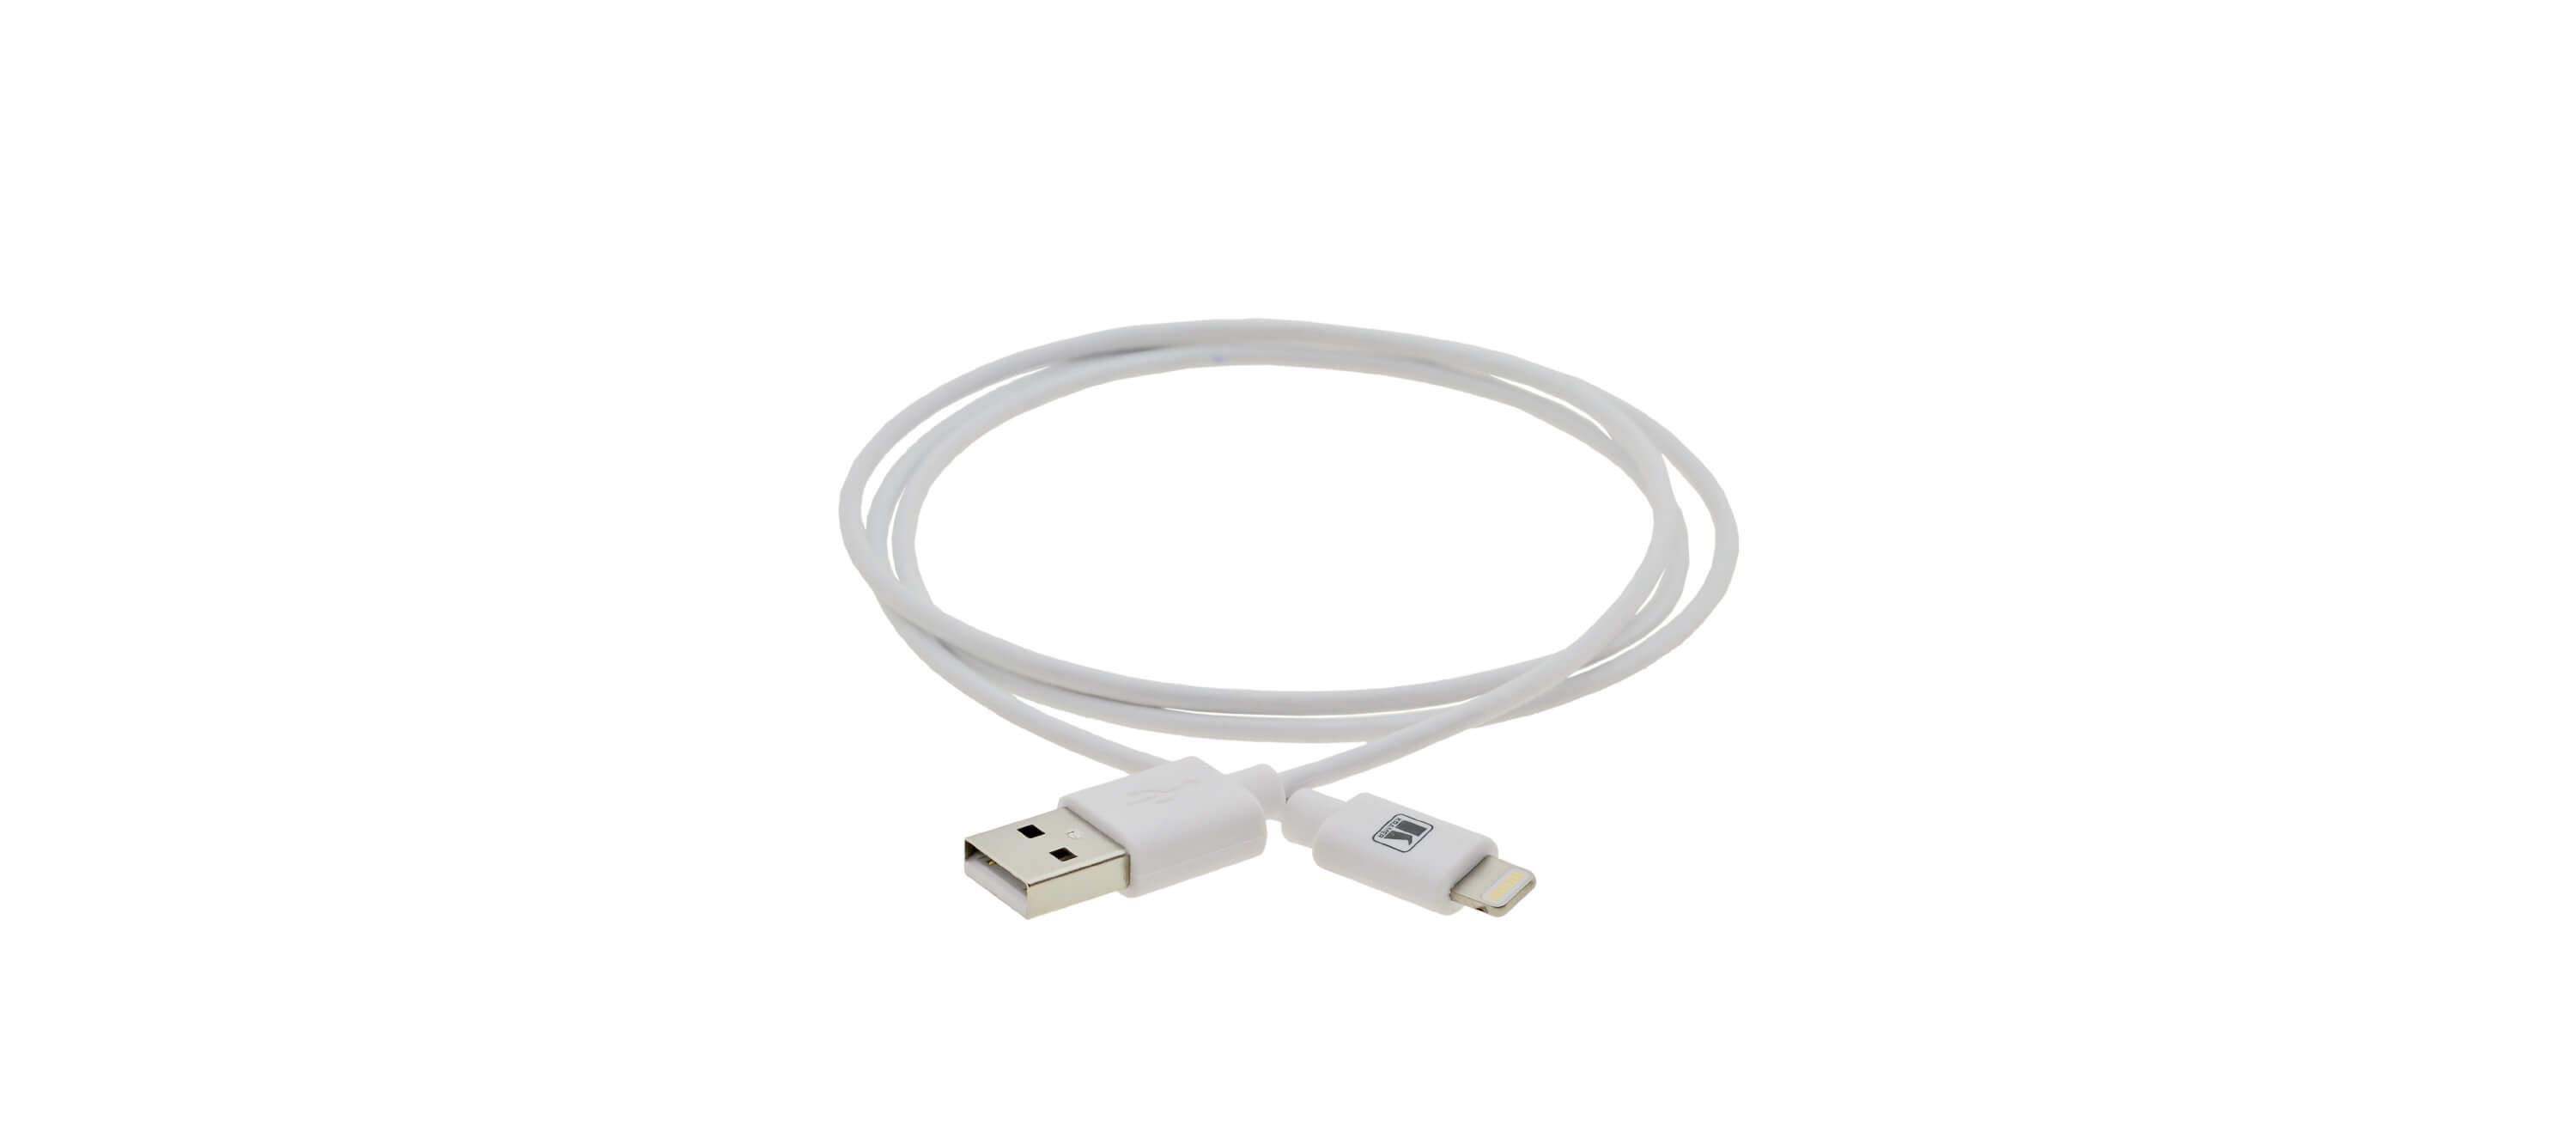 C-UA/LTN/WH-6 Apple Certified Lightning to USB Sync & Charge Cable